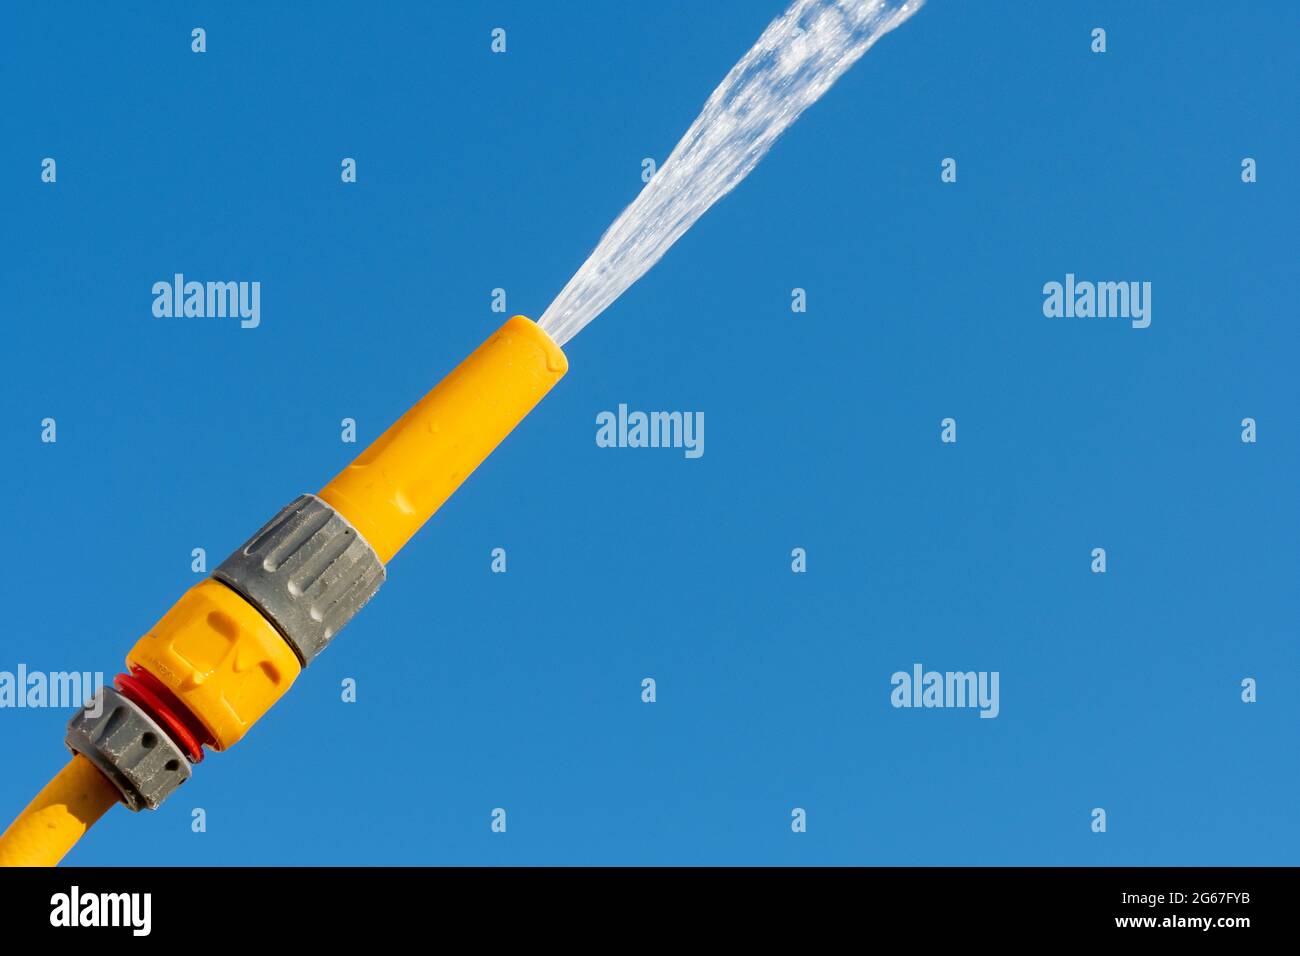 Water spraying out of a hosepipe against a clear blue sky, UK. Stock Photo